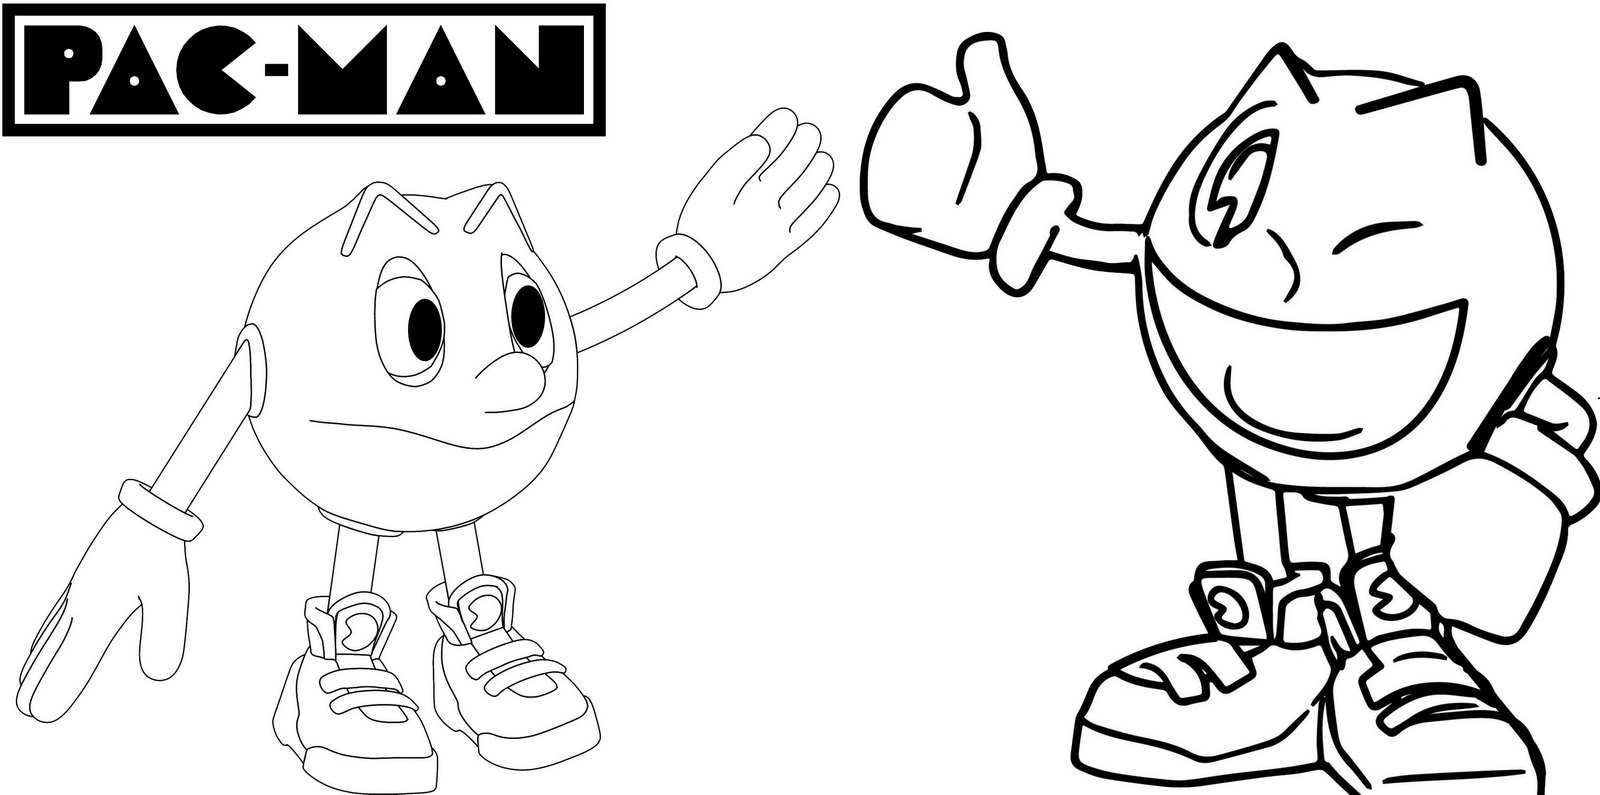 12 Pacman Coloring Pages for 3 Years and Up.